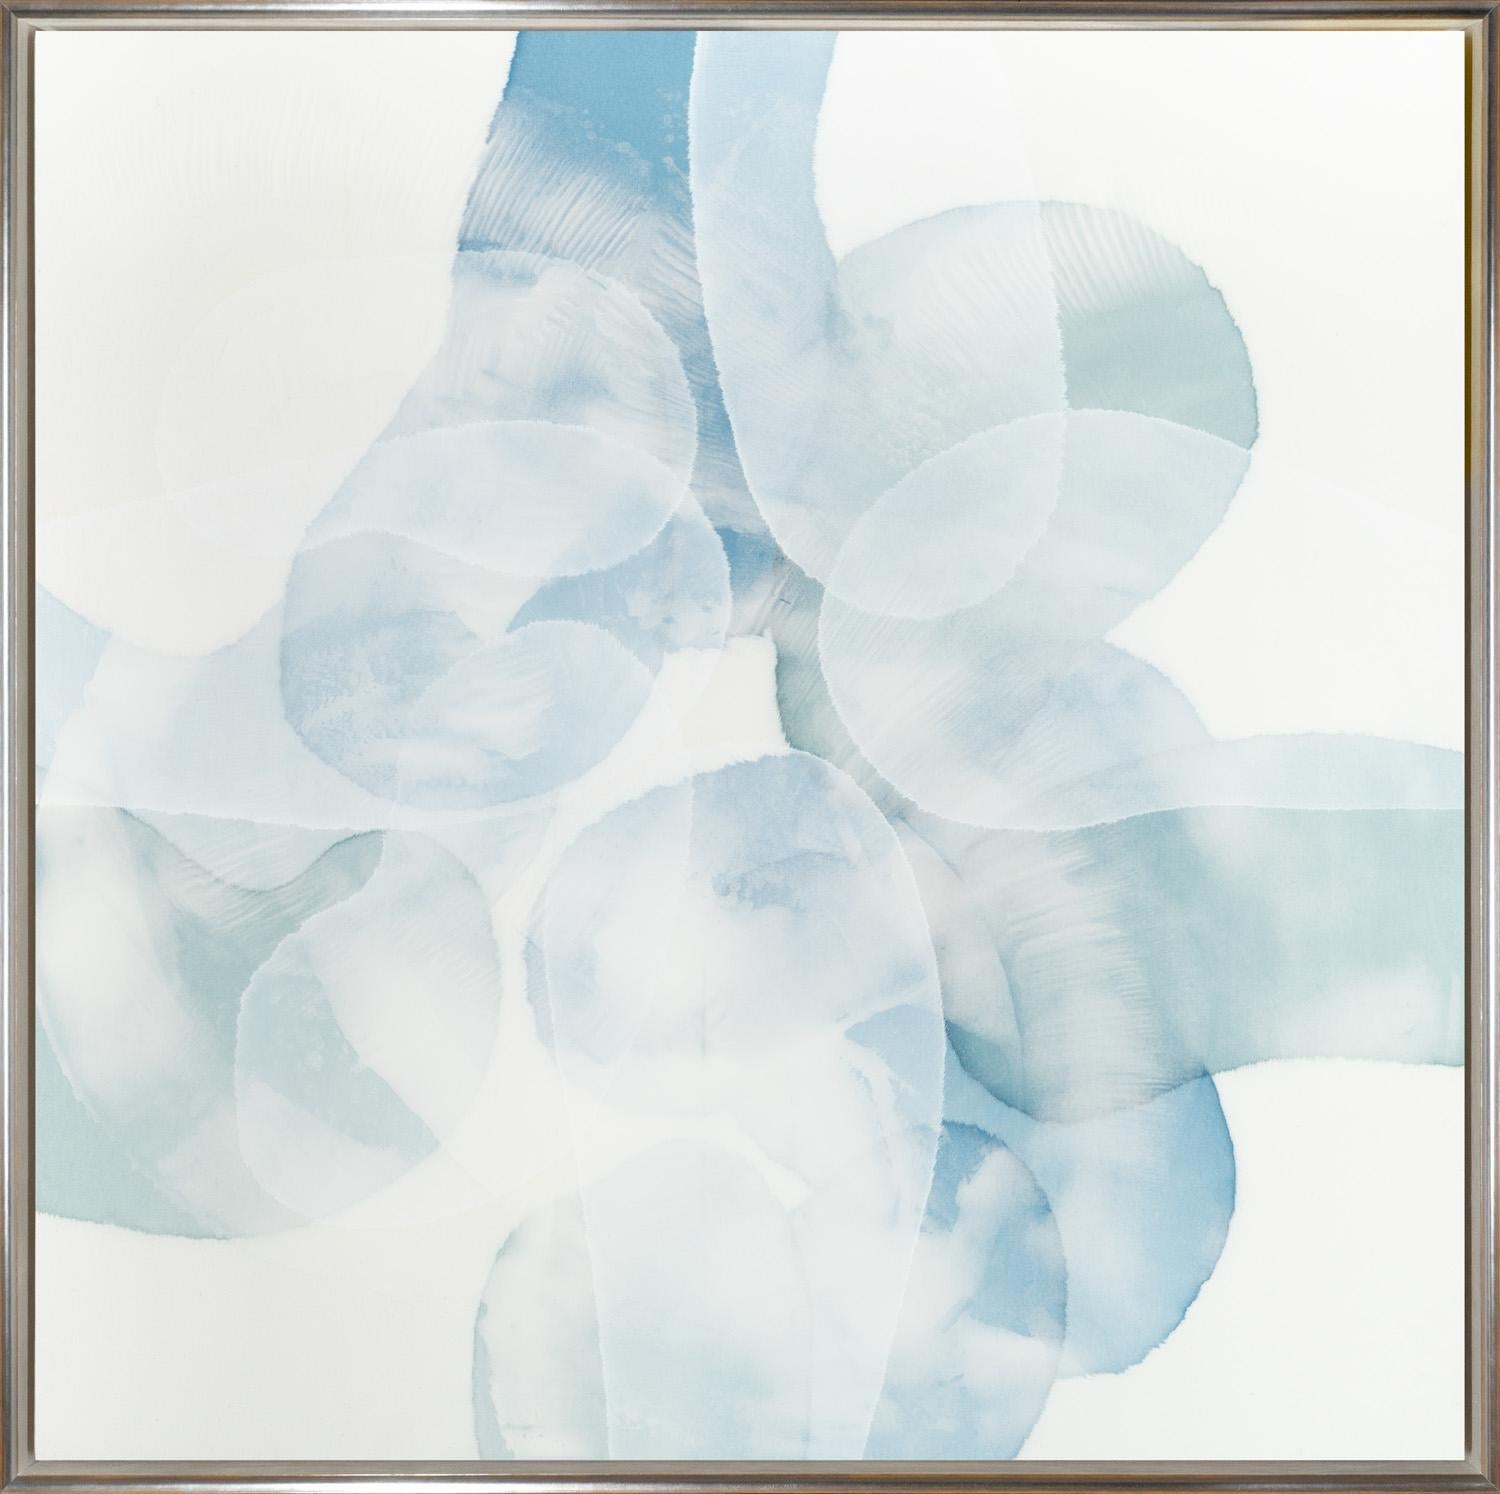 "Let's All Meet in the Middle" is a framed acrylic work on canvas by Charlie Bluett with abstract asymmetric forms in aquatic shades of blue and wisps of white. The ethereal layers of paint evoke the opaque serenity of the sea glass that inspires